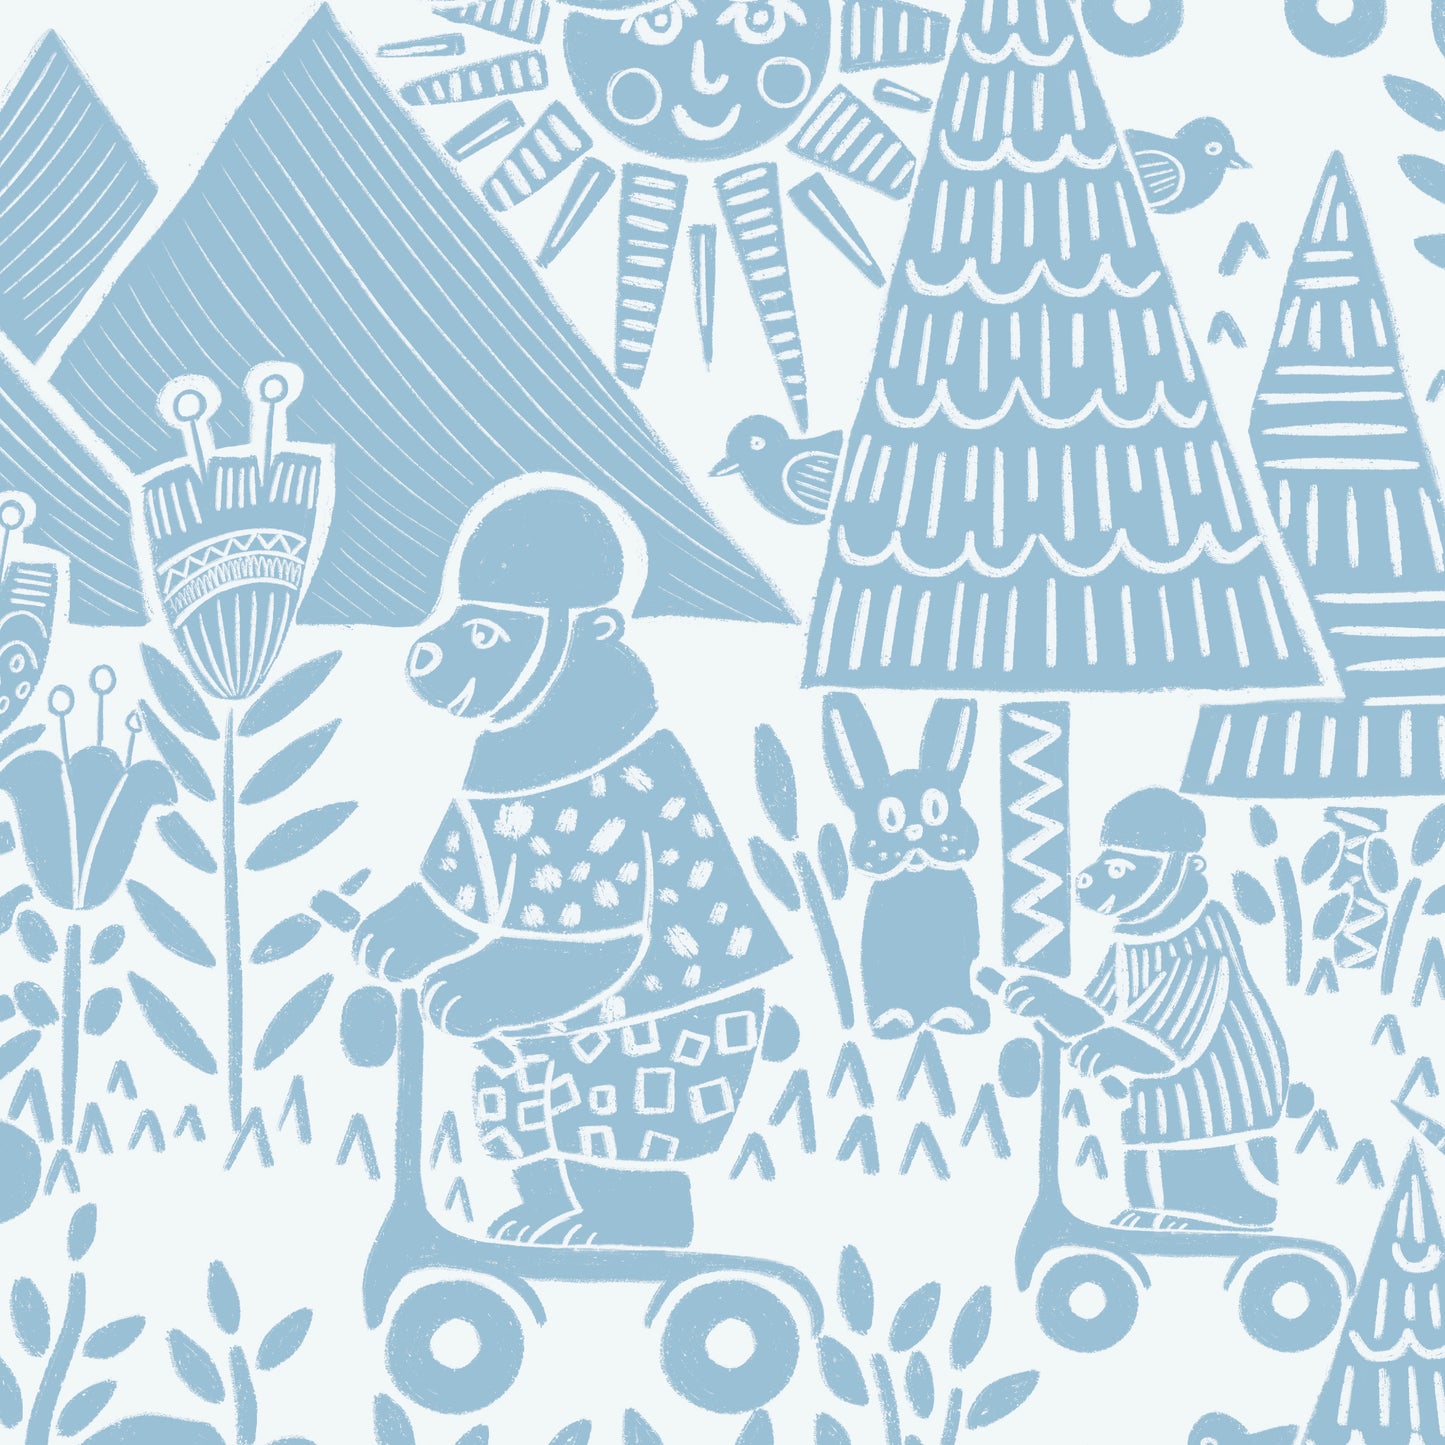 Scooting Bears Wallpaper in Blue shown in a close up view.